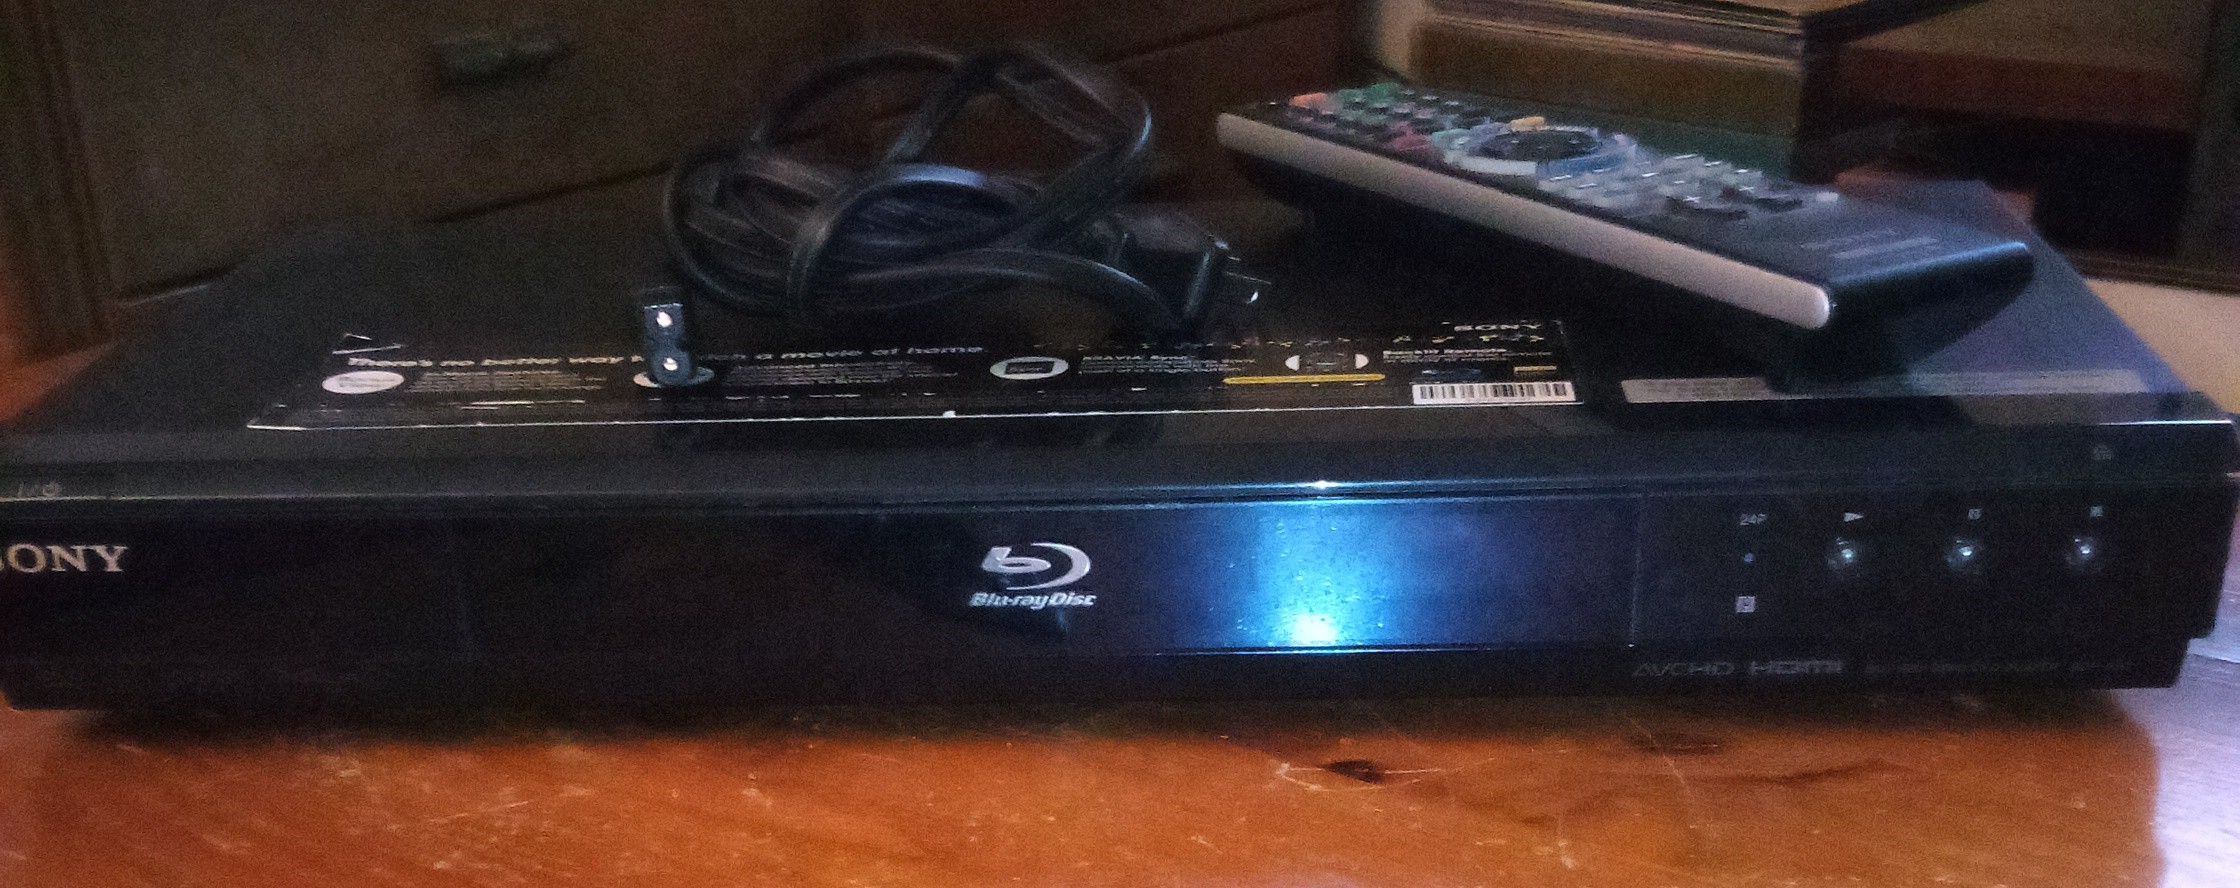 Sony Blu-ray Player With Remote Control 